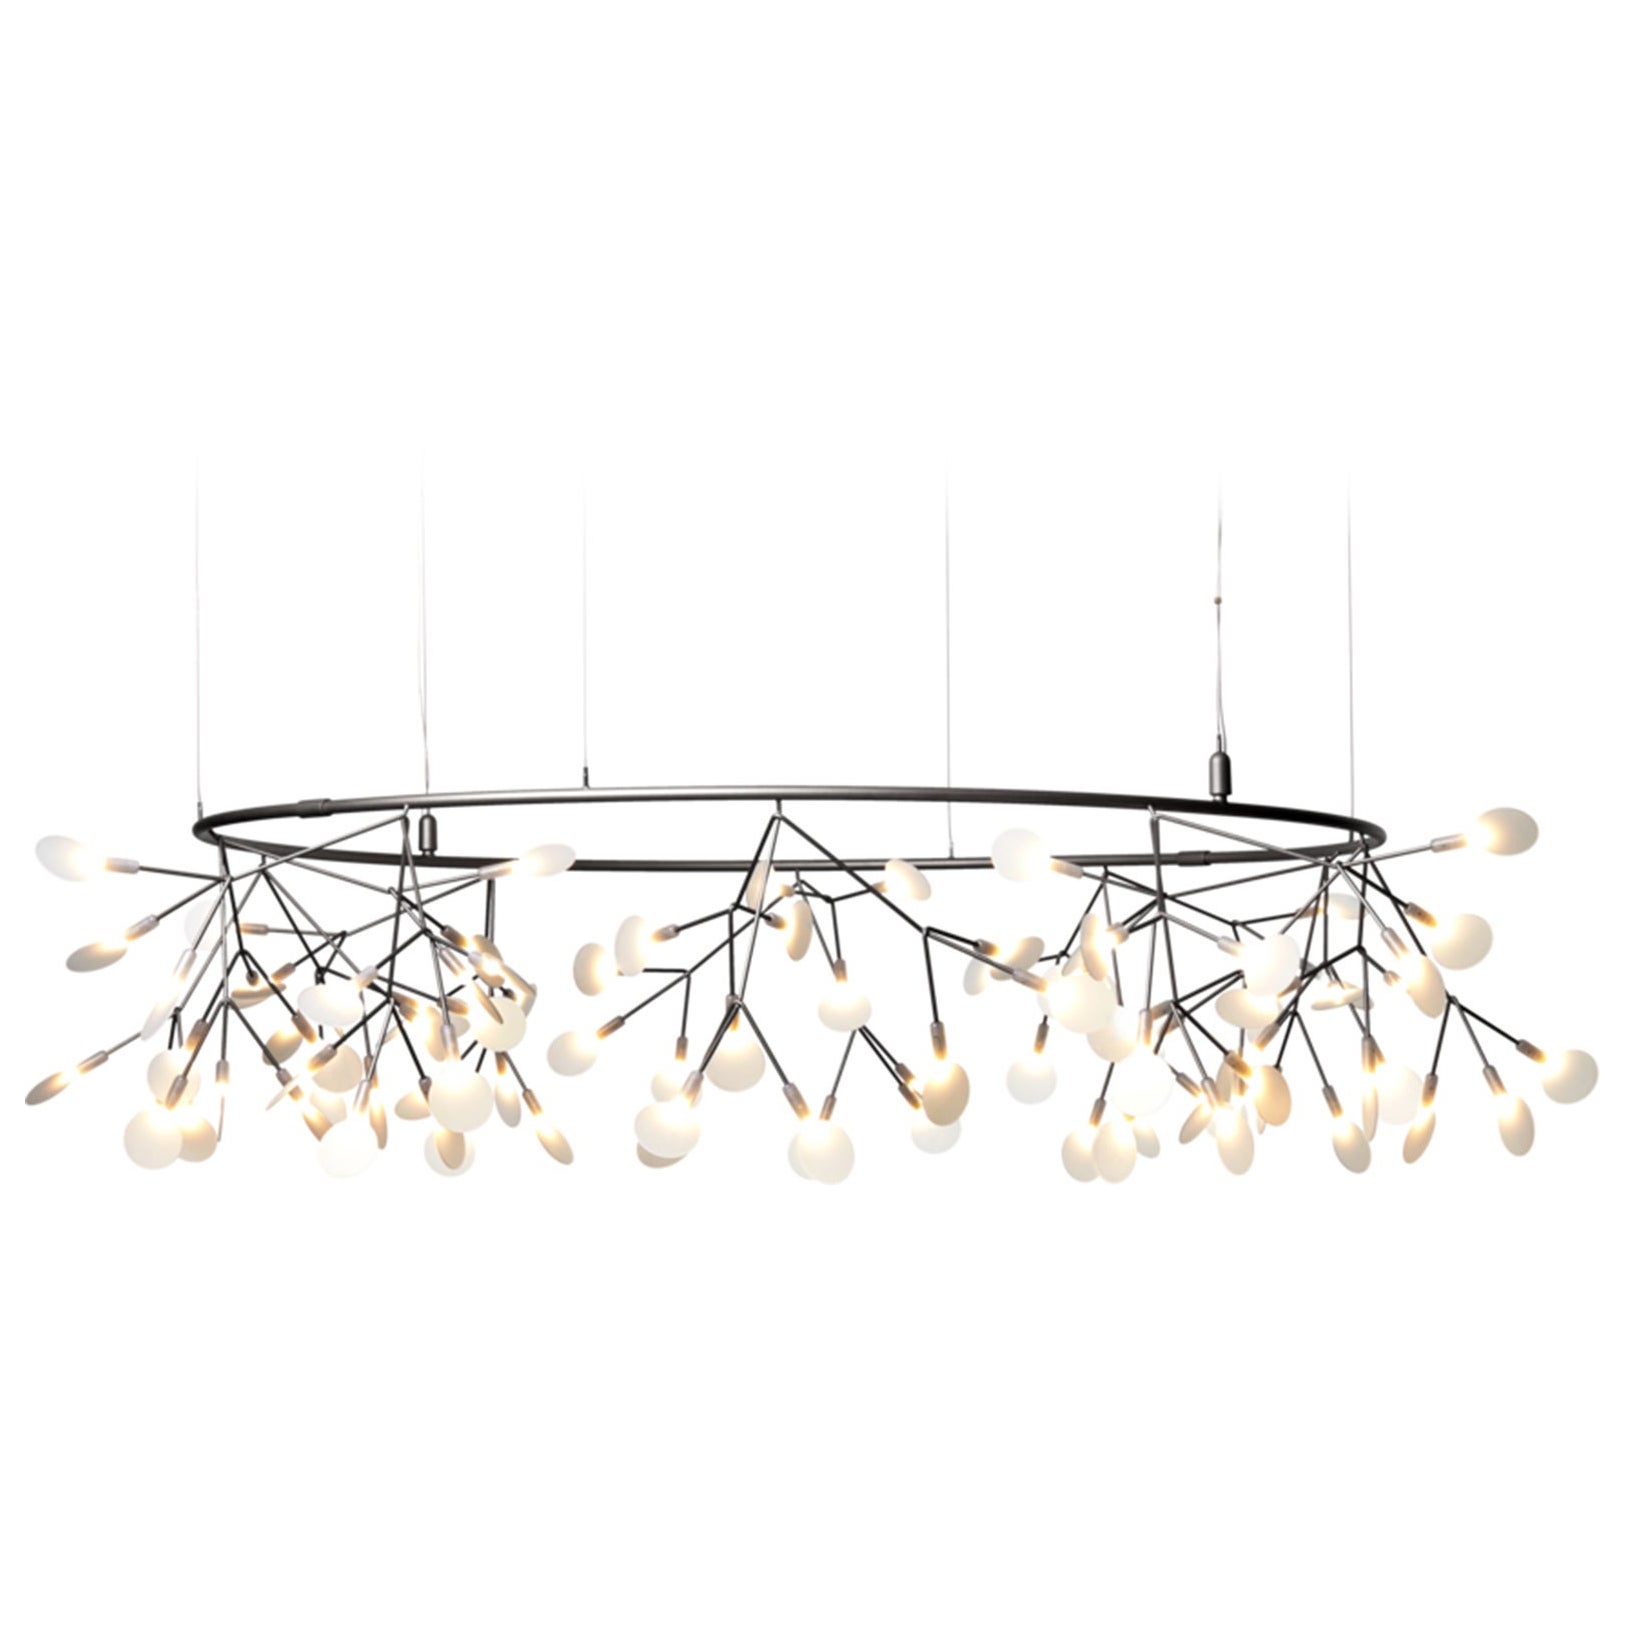 Moooi Heracleum The Big O Small Suspension Lamp in Nickel by Bertjan Pot For Sale